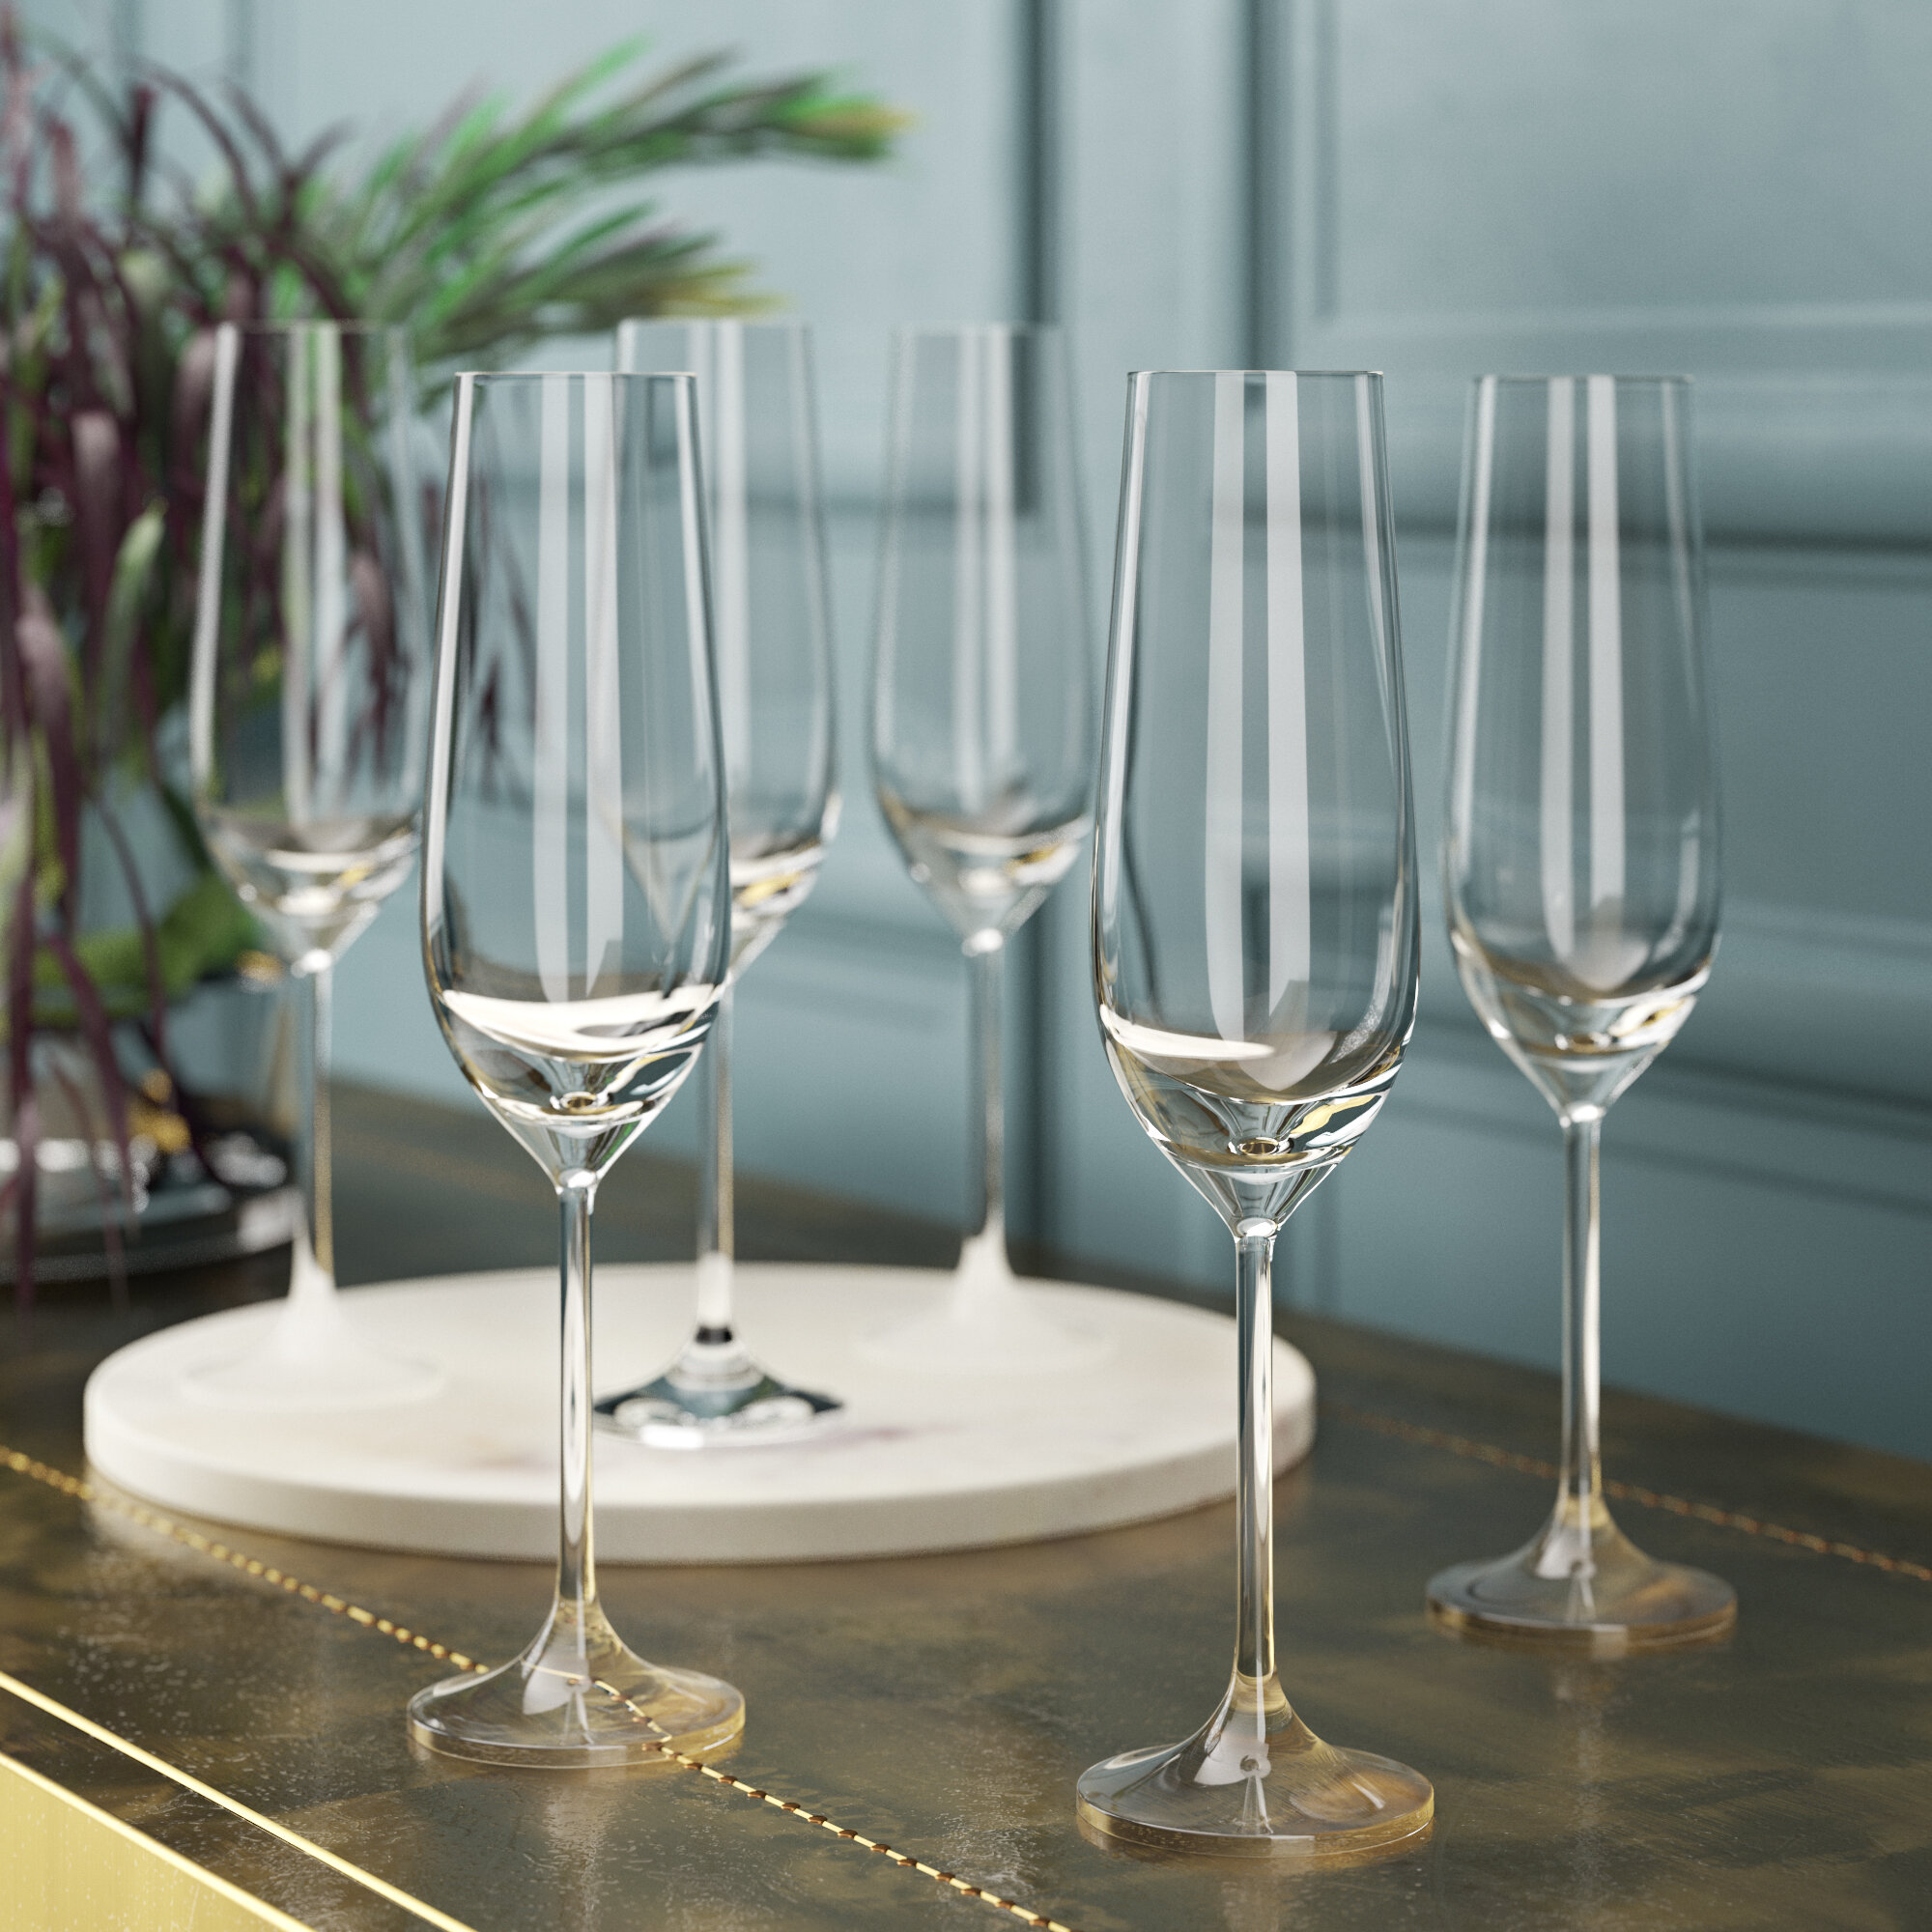 Lucaris crystal glass champagne flutes (five styles in total